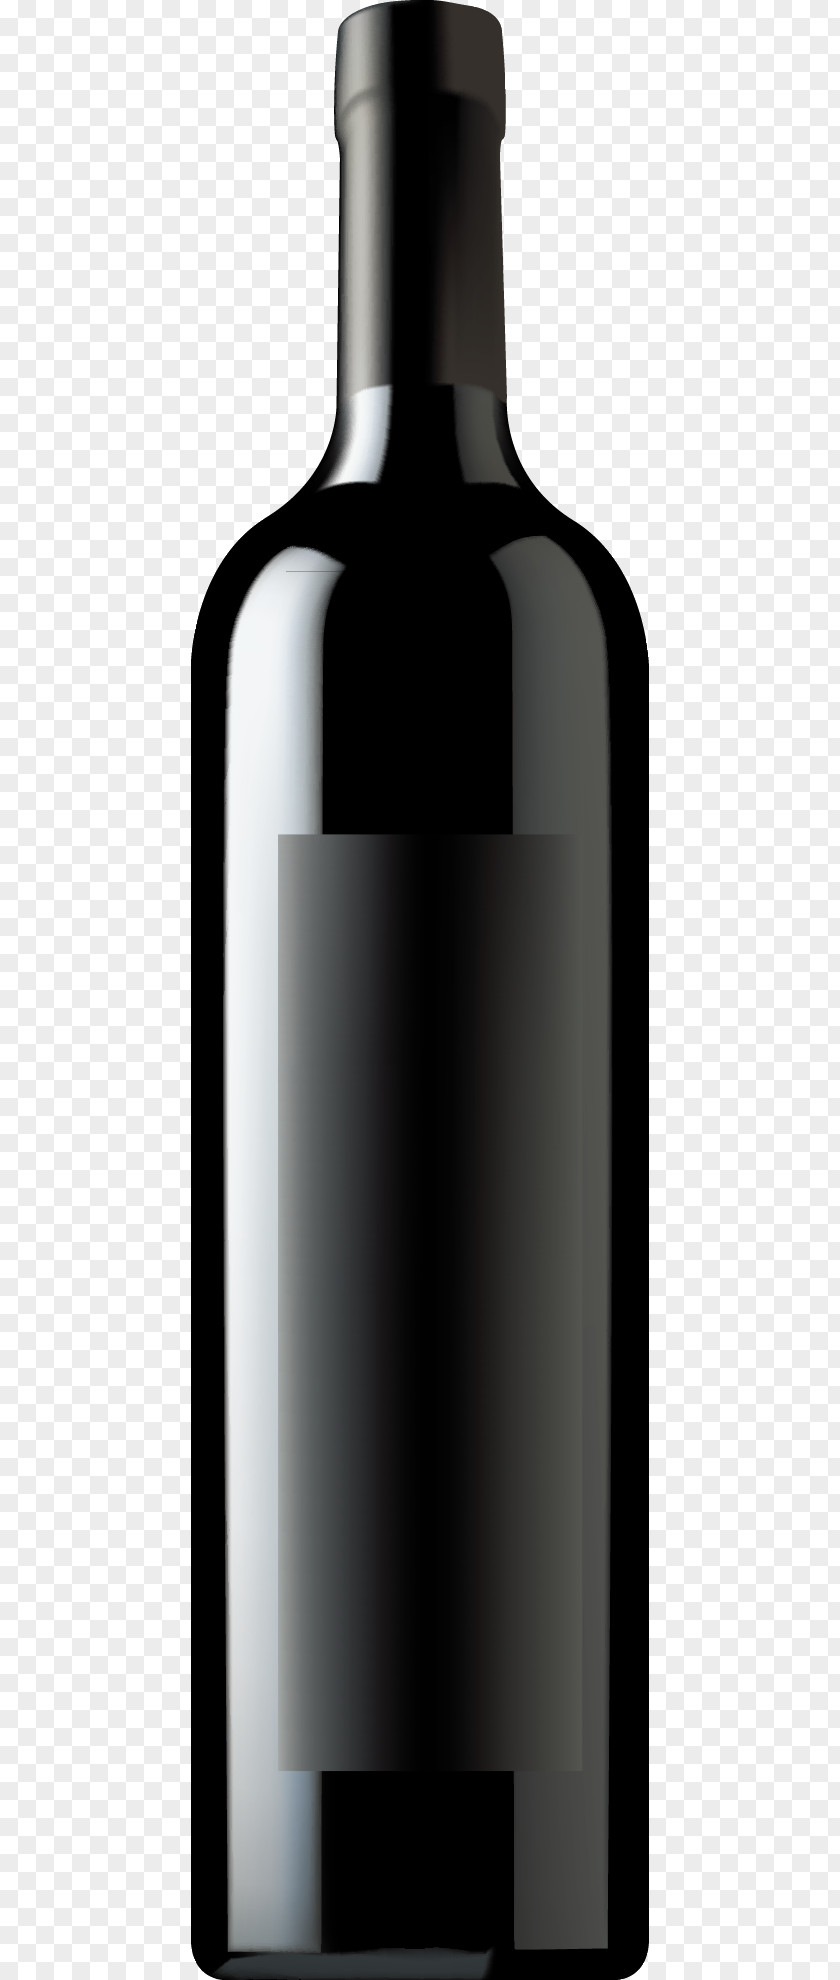 Glass Material Decoration Wine Bottle PNG